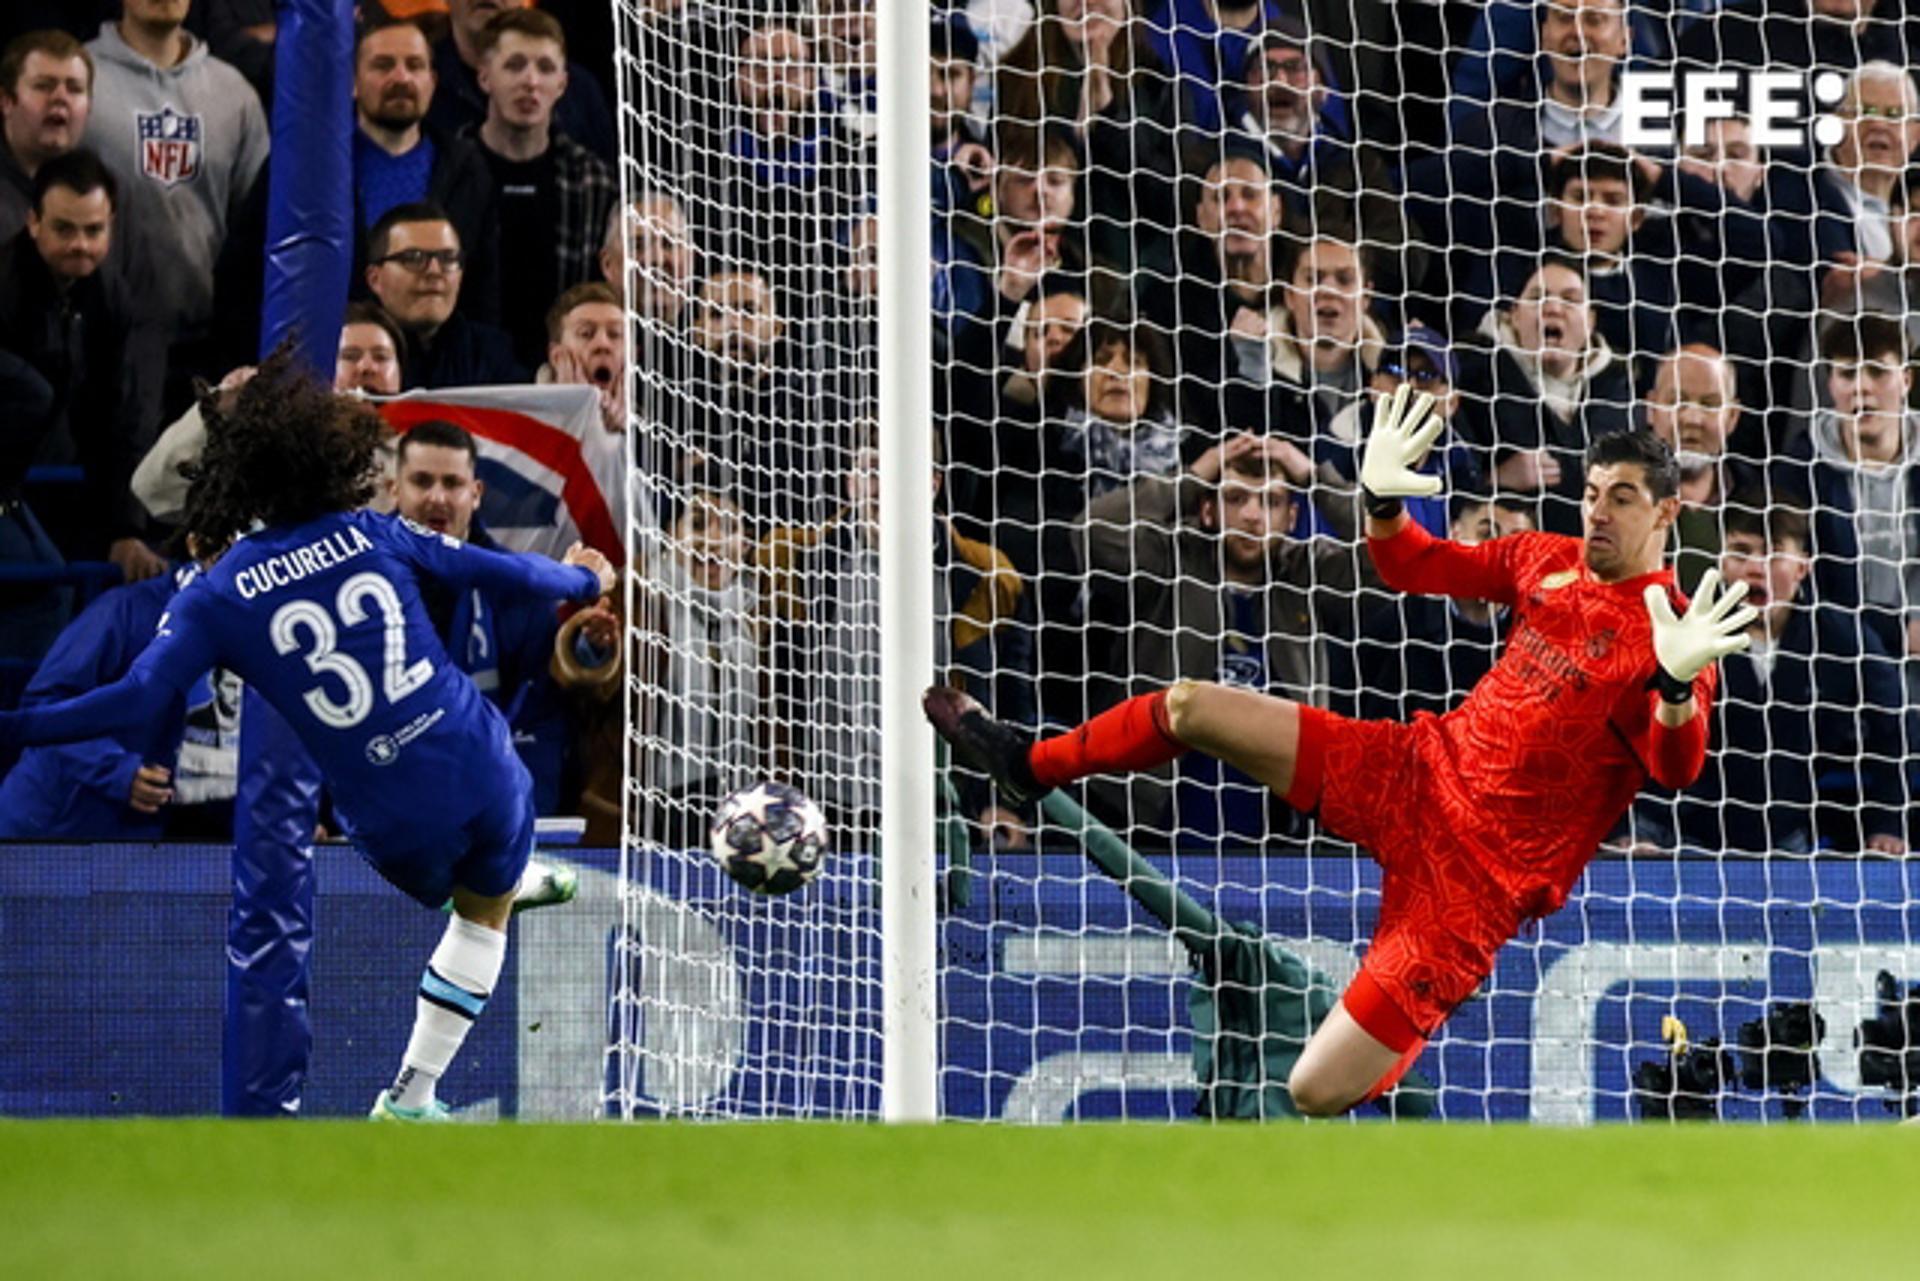 Real Madrid goalkeeper Thibaut Courtois (R) in action against Marc Cucurella of Chelsea during the UEFA Champions League quarterfinal 2nd leg in London on 18 April 2023. EFE/EPA/TOLGA AKMEN
